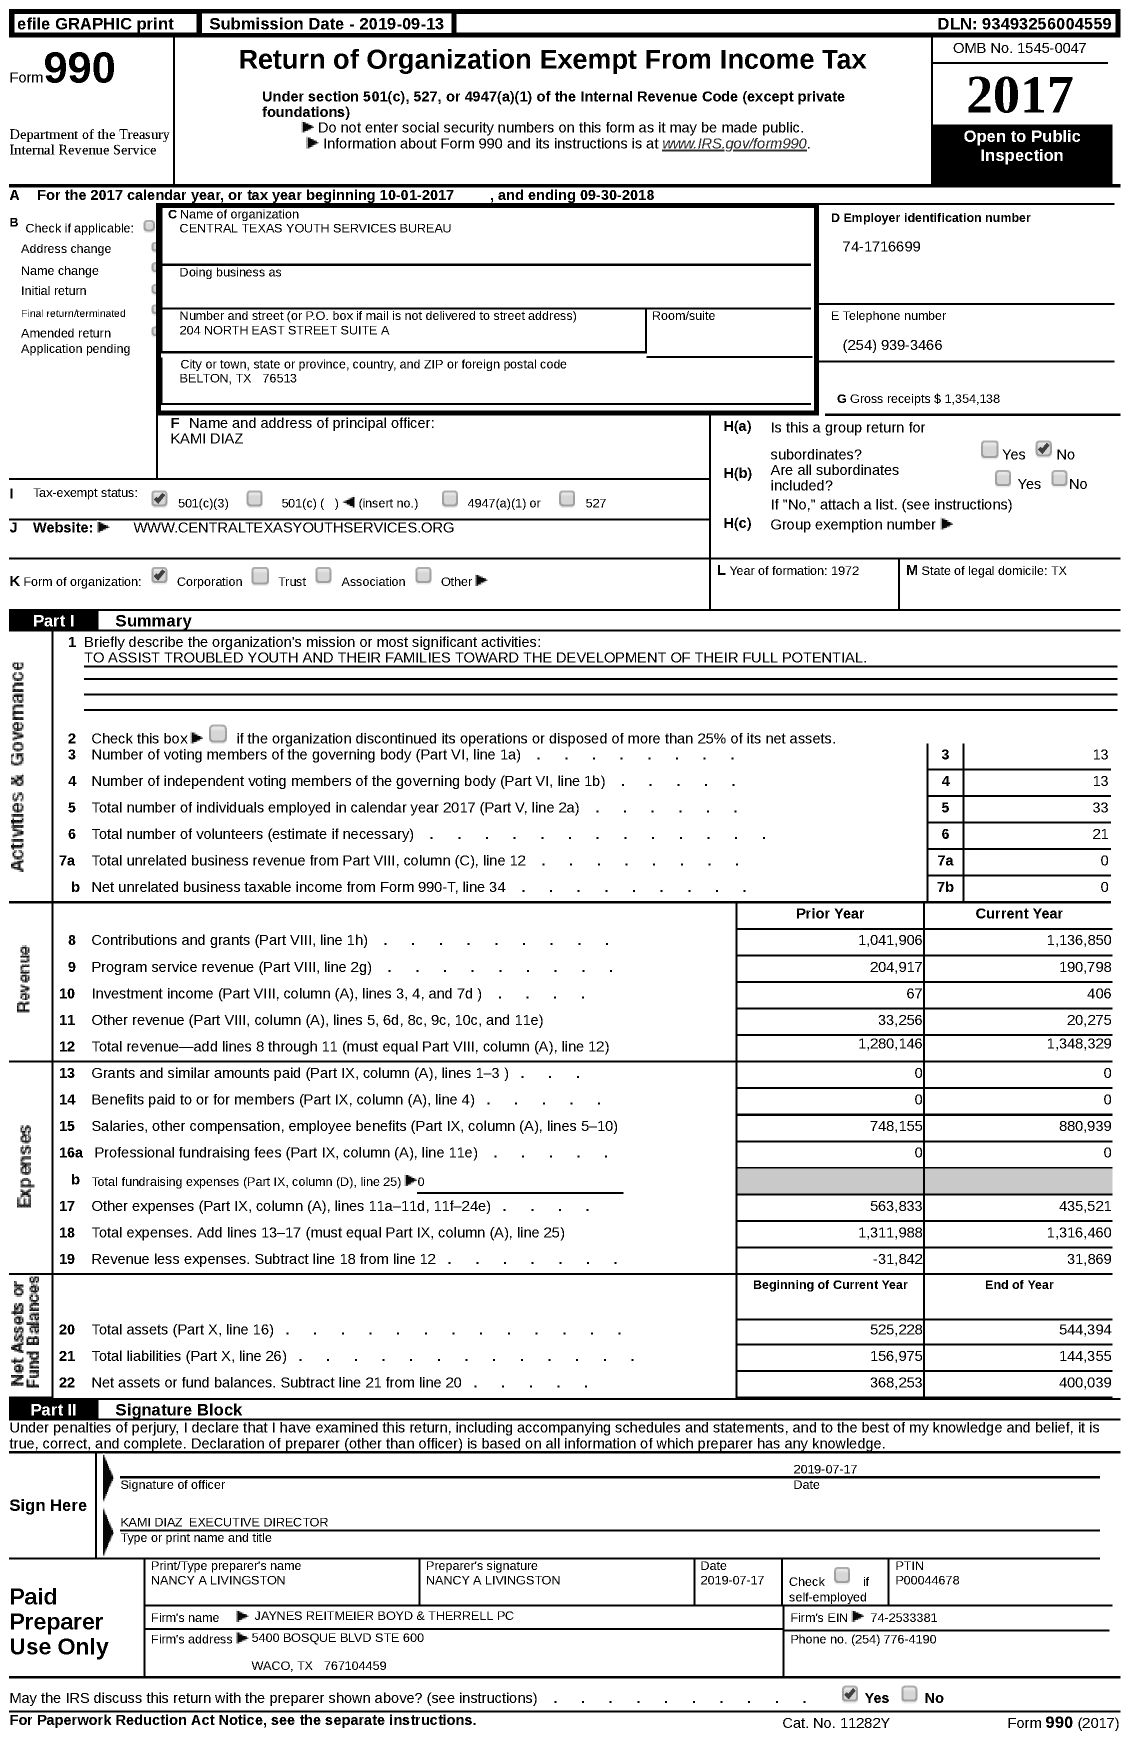 Image of first page of 2017 Form 990 for Central Texas Youth Services Bureau